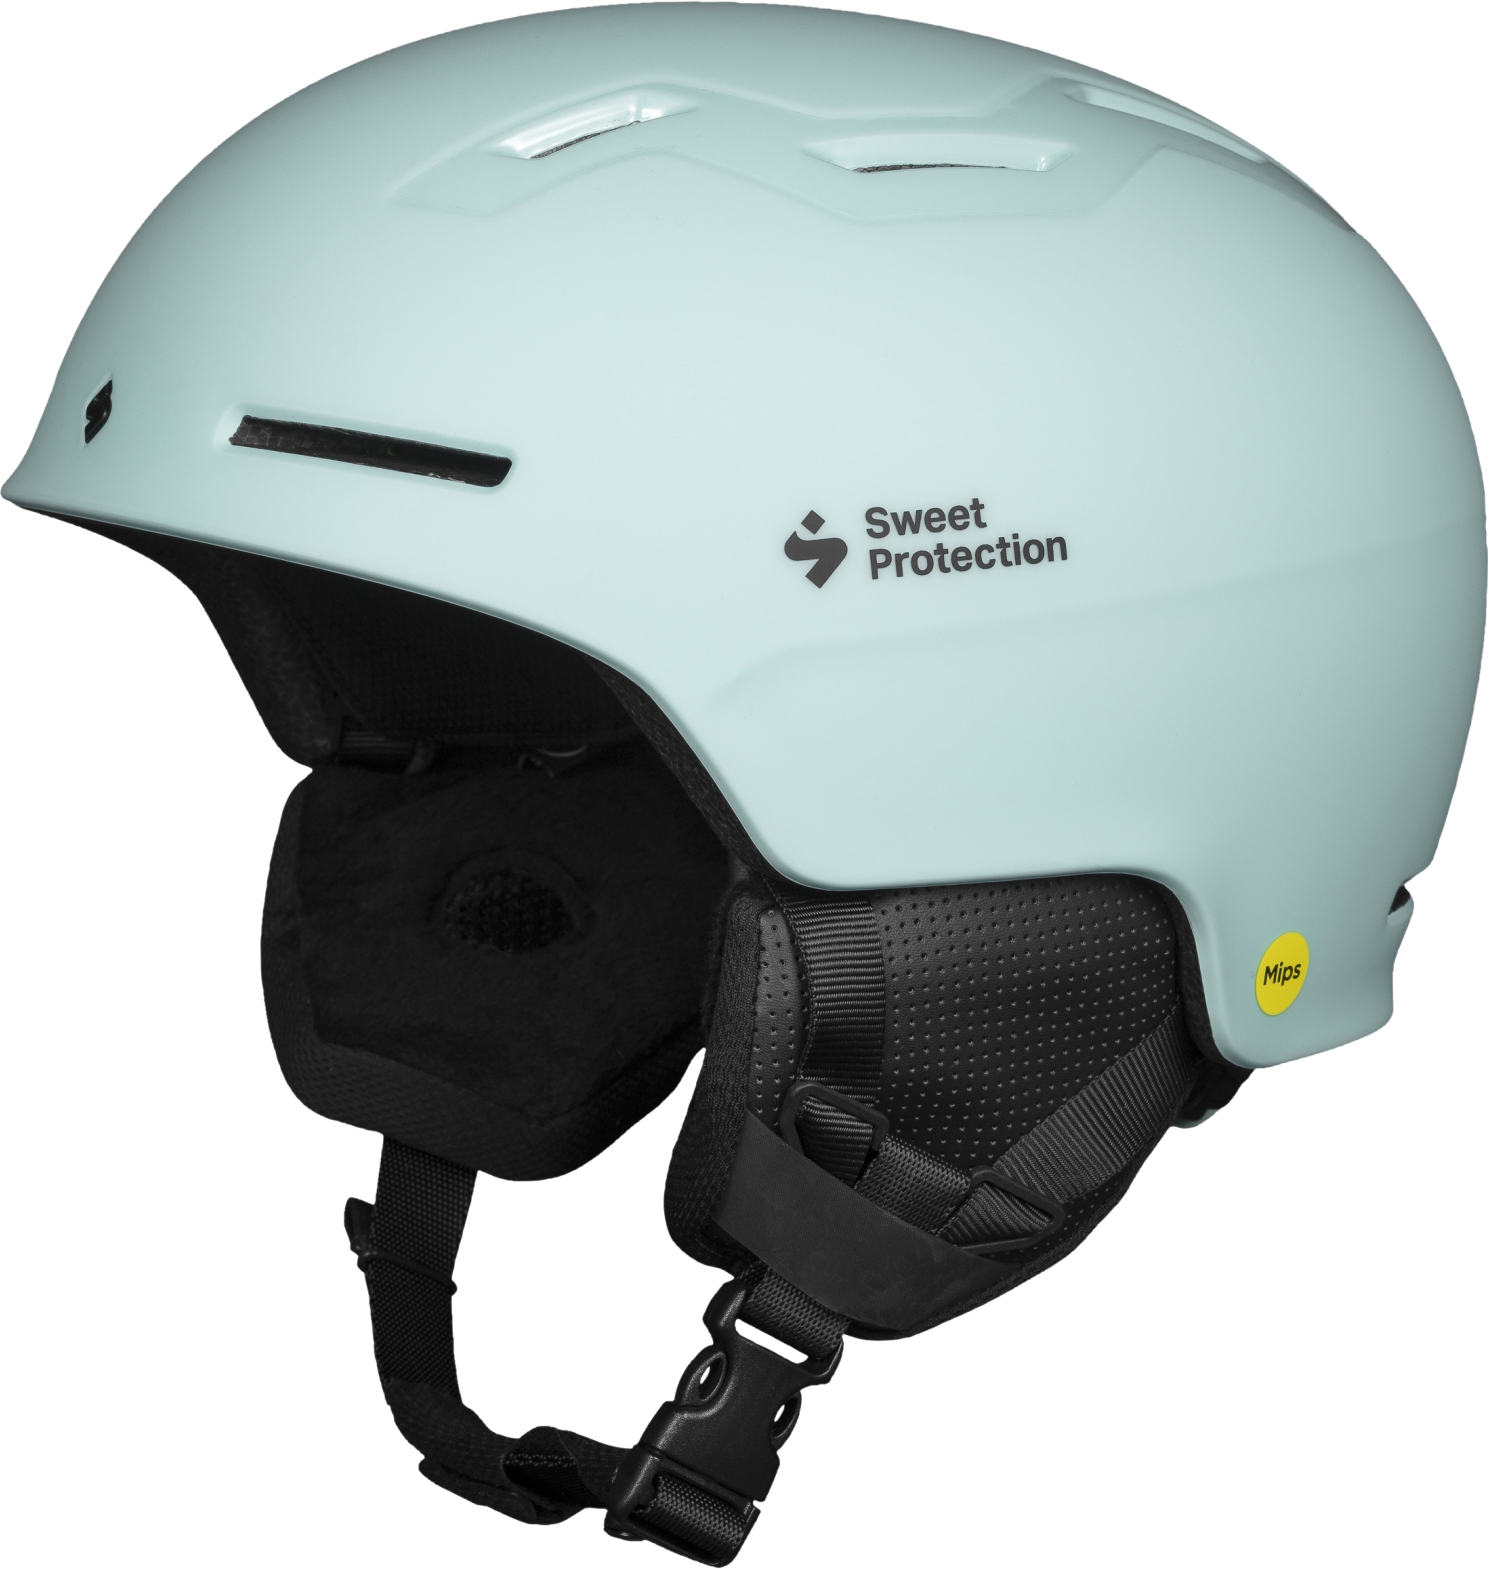 E-shop Sweet Protection Winder MIPS Helmet - Misty Turquoise 56-59